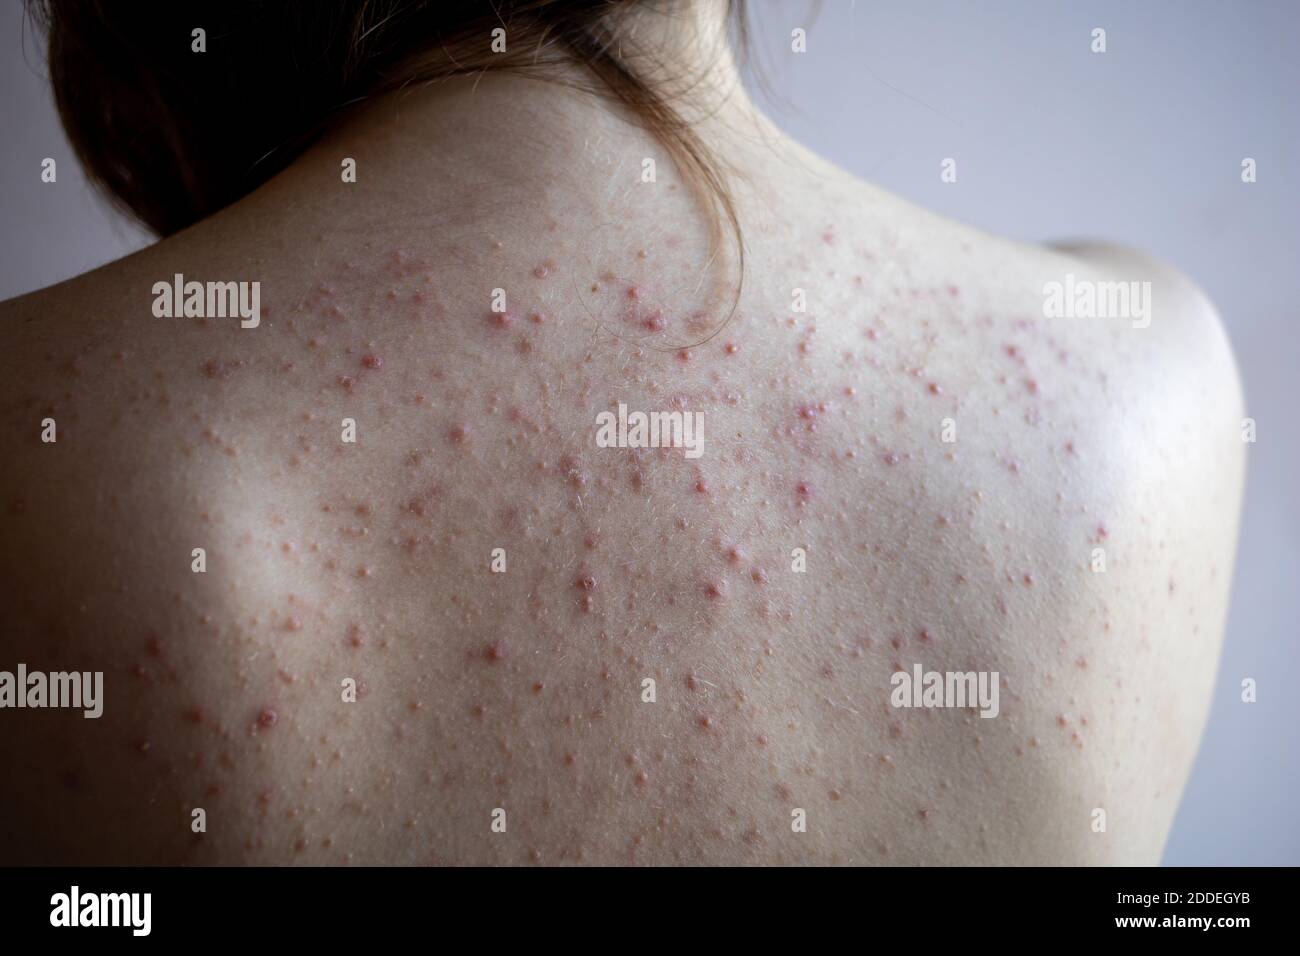 woman back with acne, red spots, skin disease Stock Photo